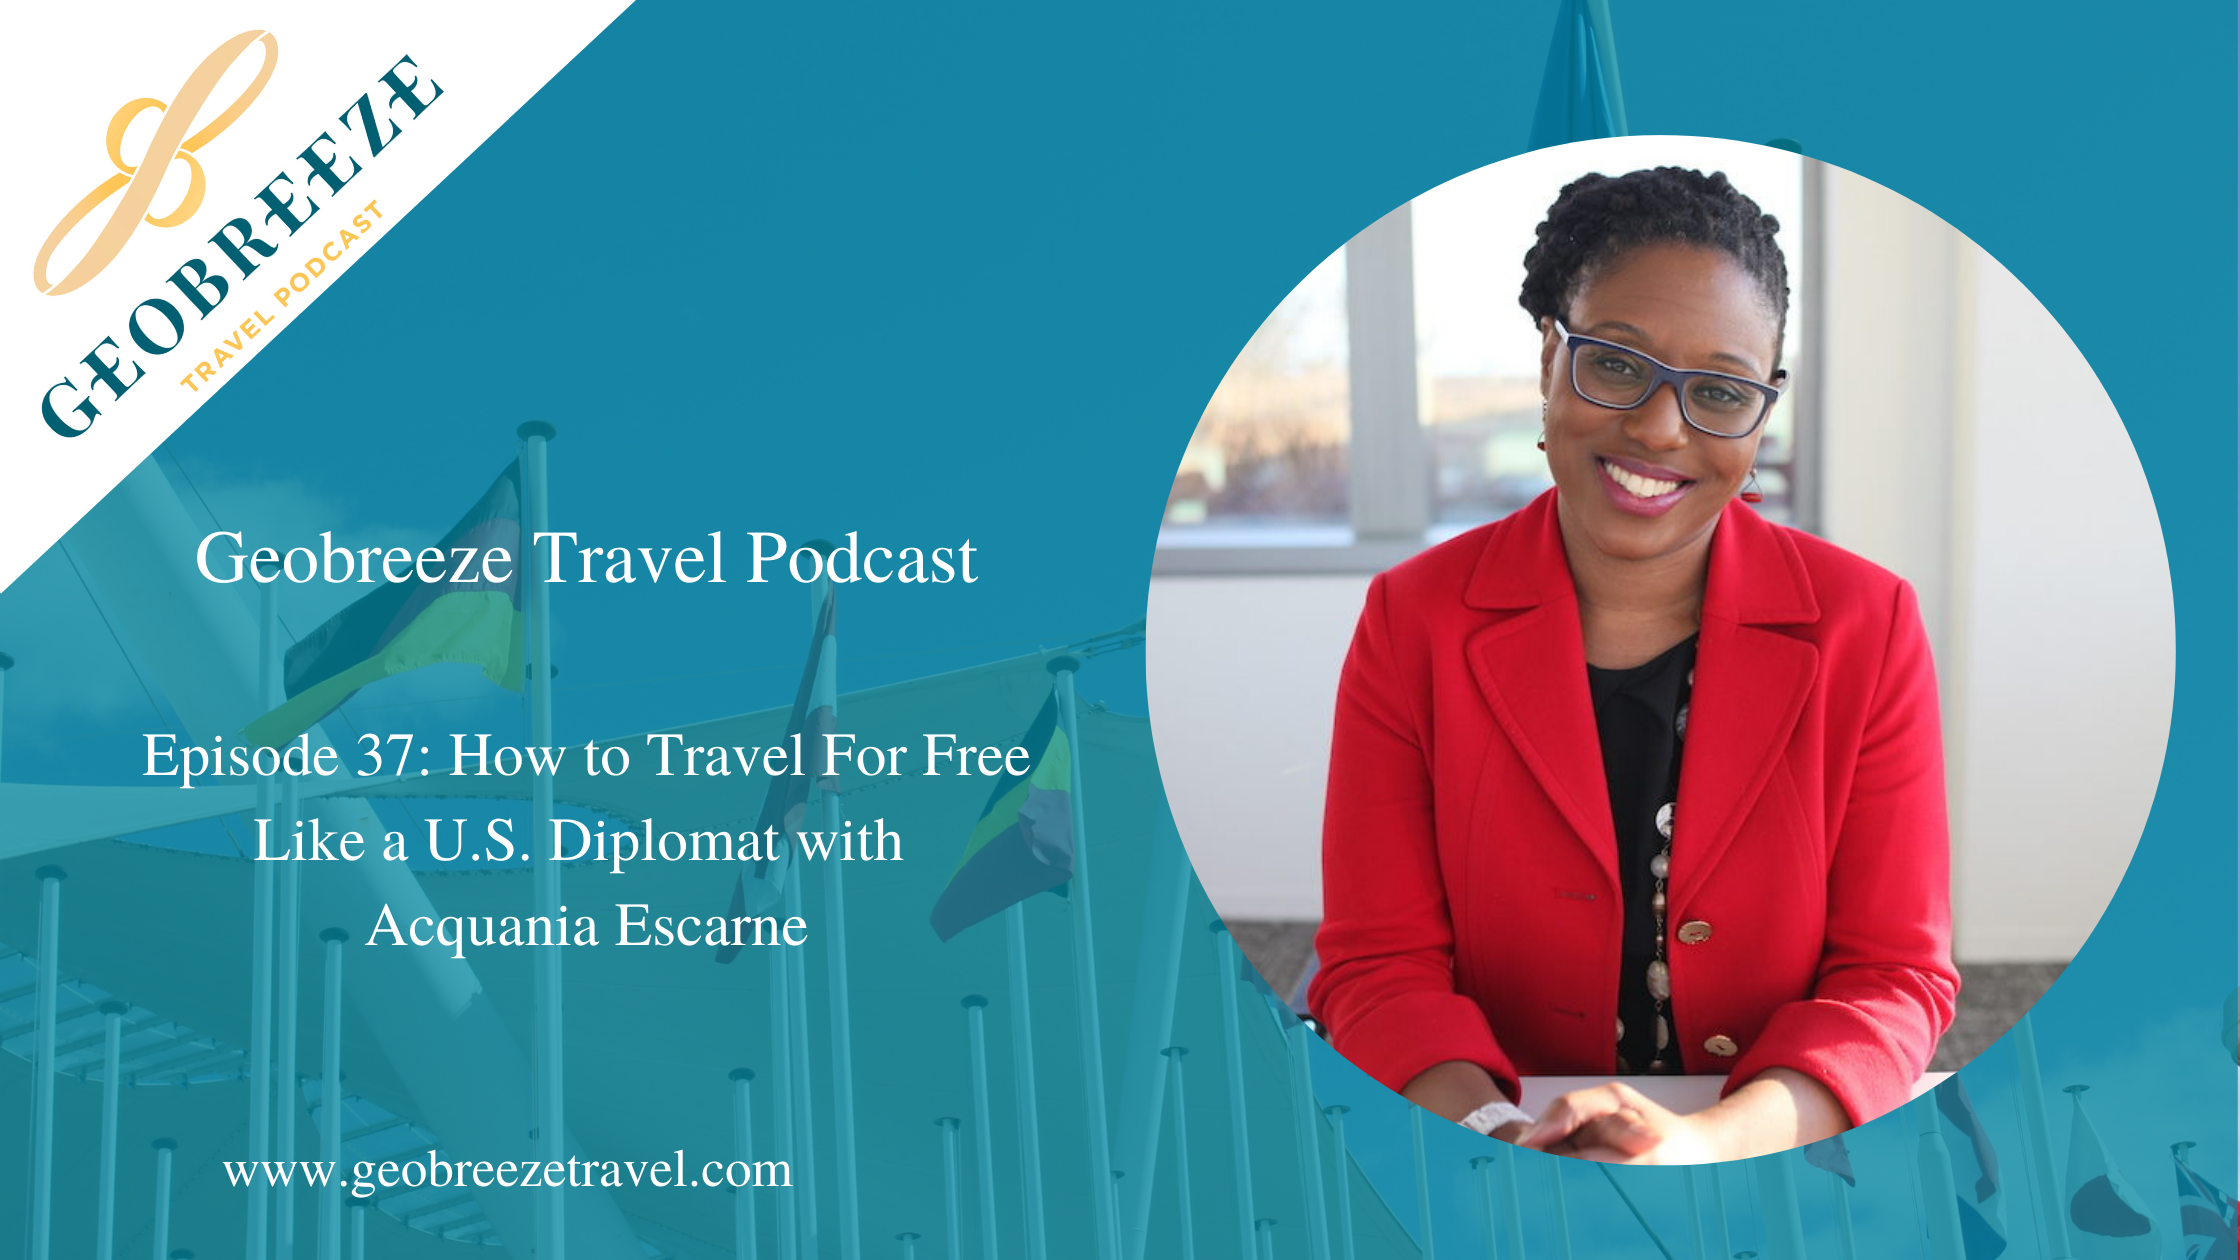 Episode 37: How to Travel For Free Like a U.S. Diplomat with Acquania Escarne